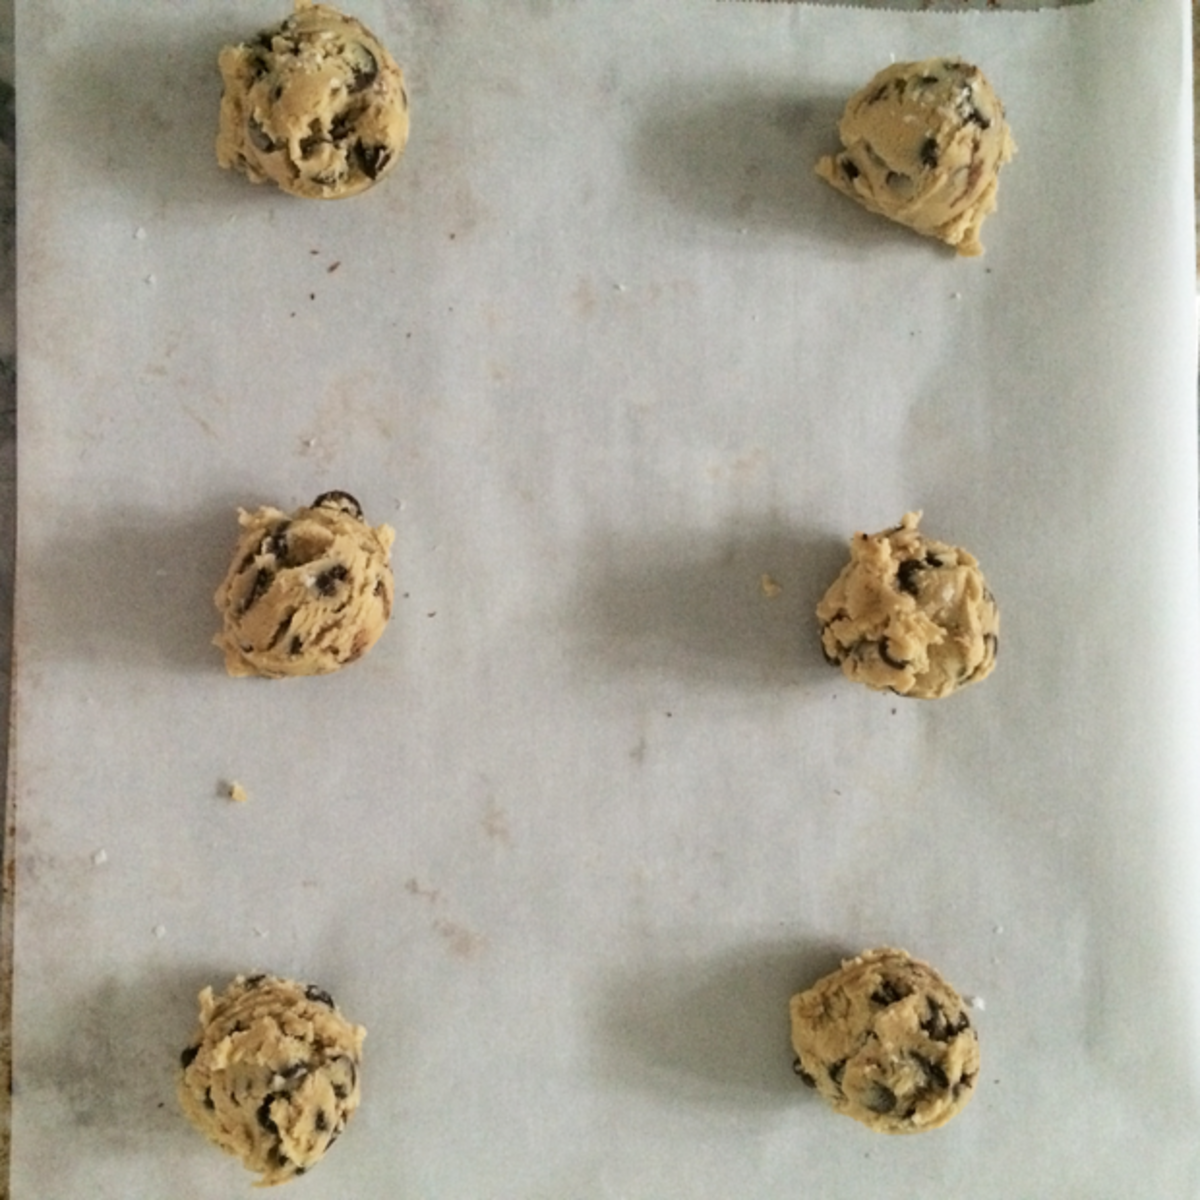  {Baking off frozen chocolate chip cookies for the nursing staff}